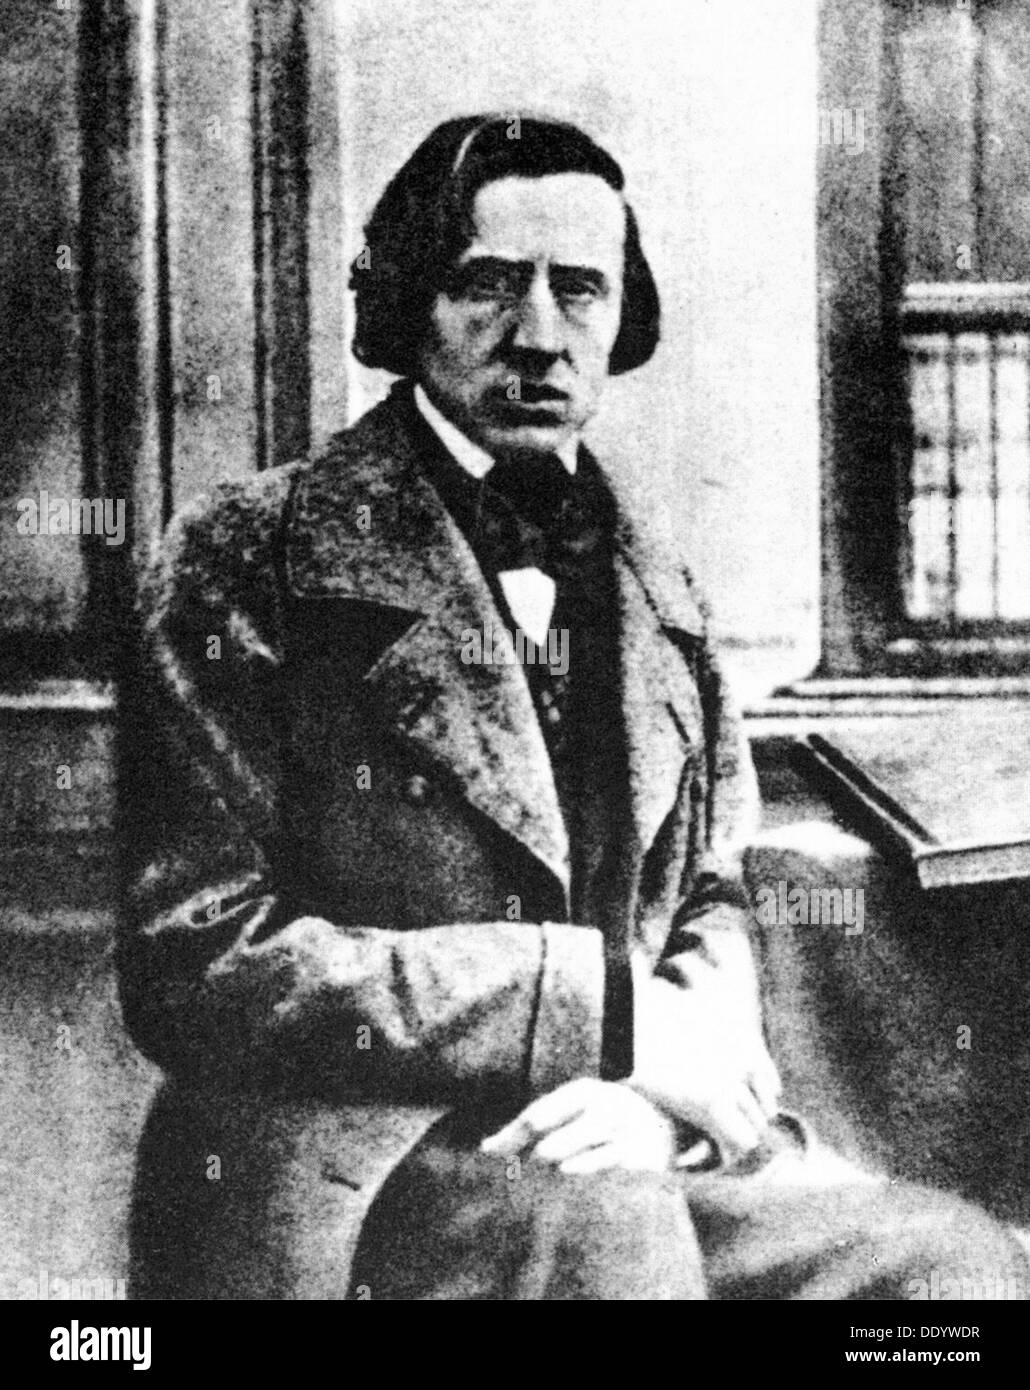 Frédéric Chopin, Polish pianist and composer, 1849. Artist: Louis-Auguste Bisson Stock Photo